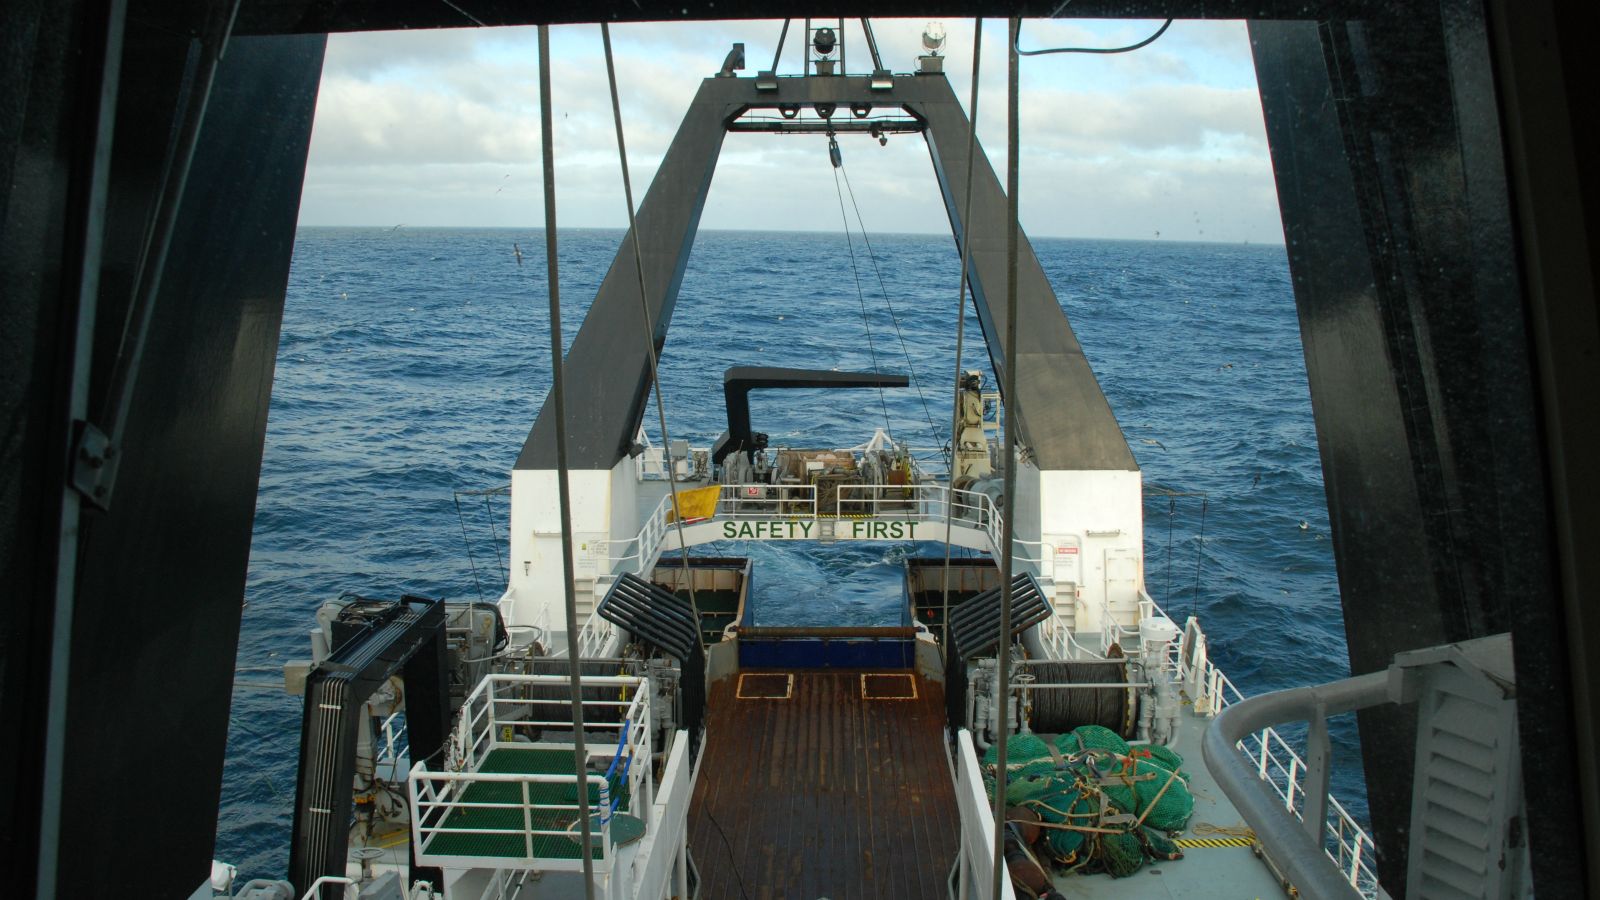 View from the captain’s deck of the Tangaroa on the Chatham Rise. The front of the ship is shown clearly with the ocean and various seabirds out ahead.